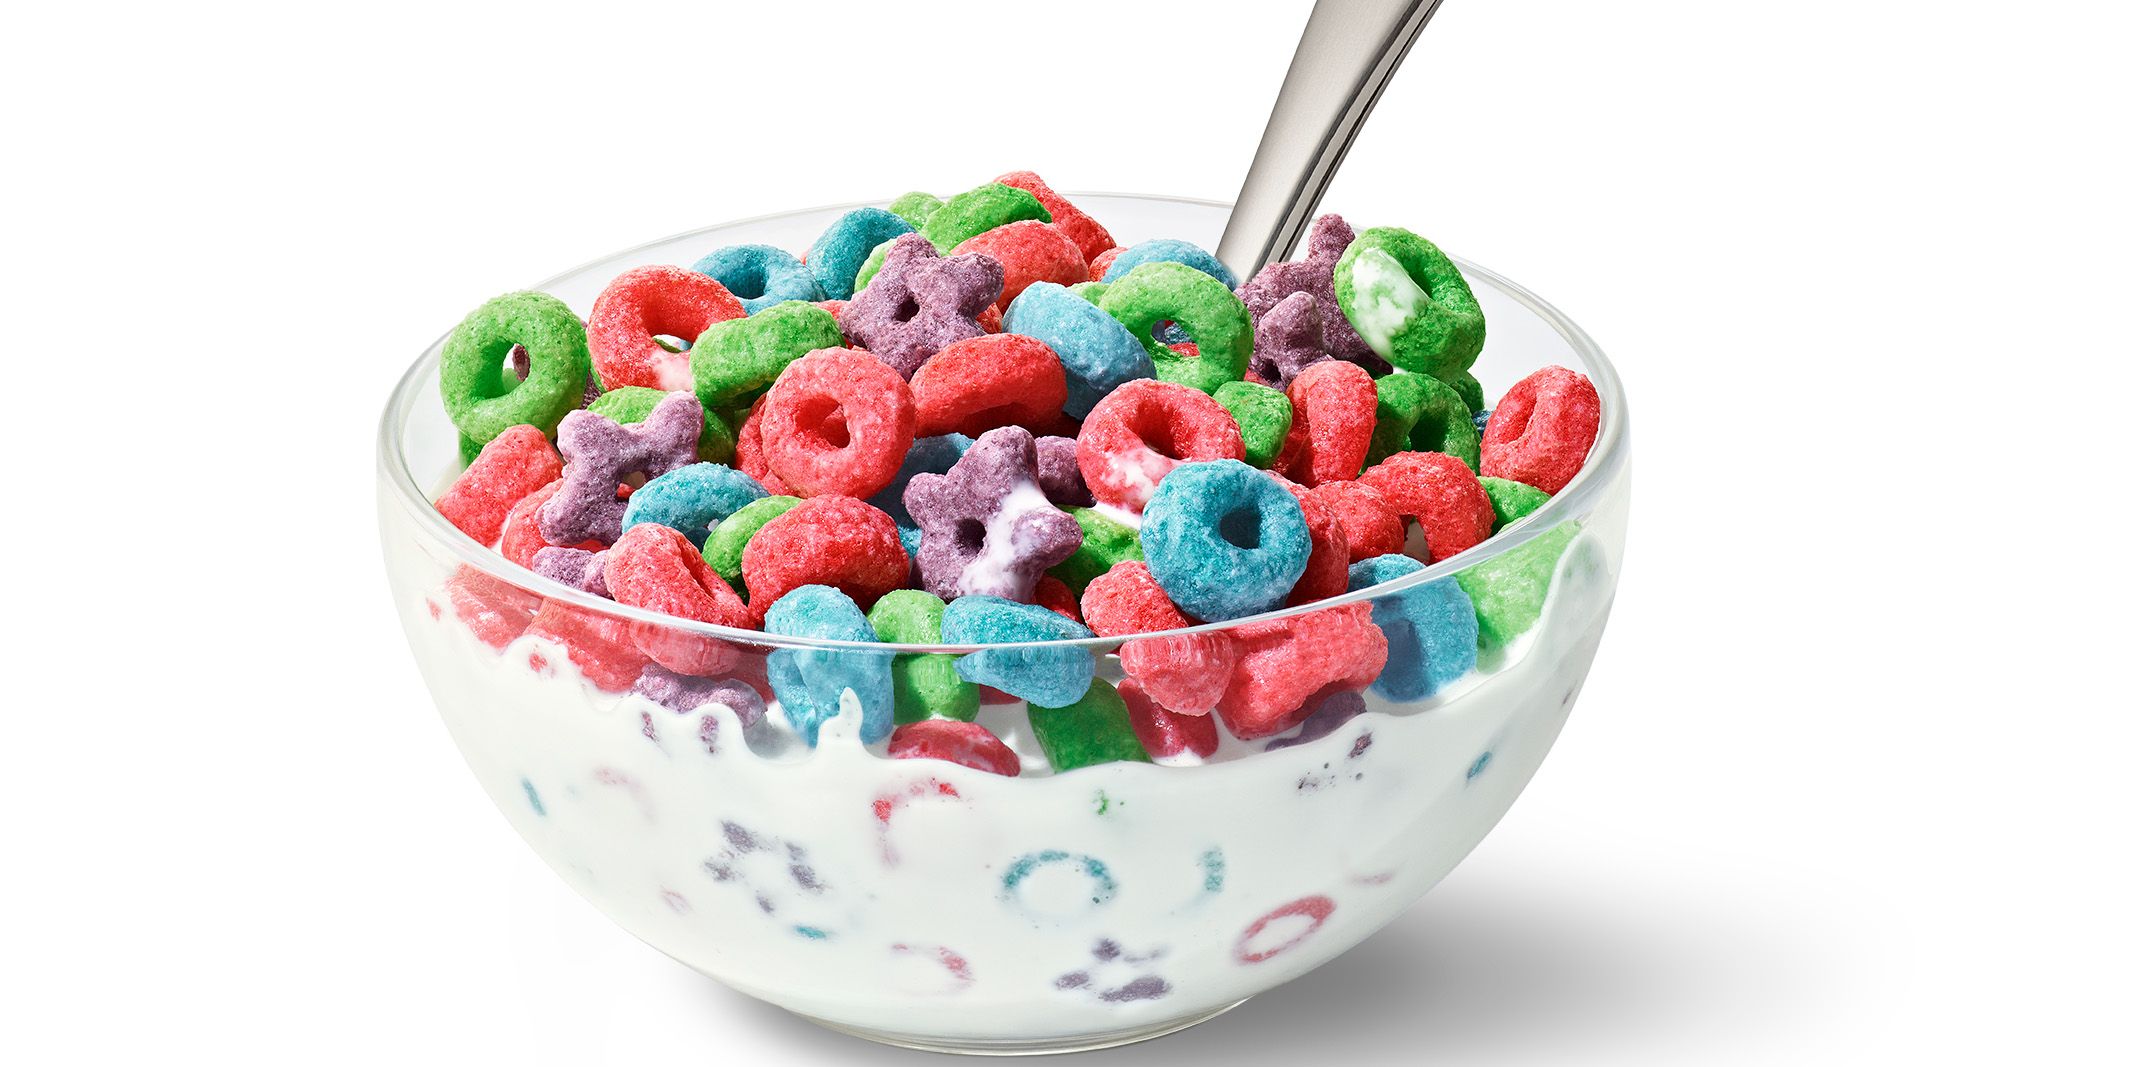 Wild Berry Froot Loops Features New Star Shape